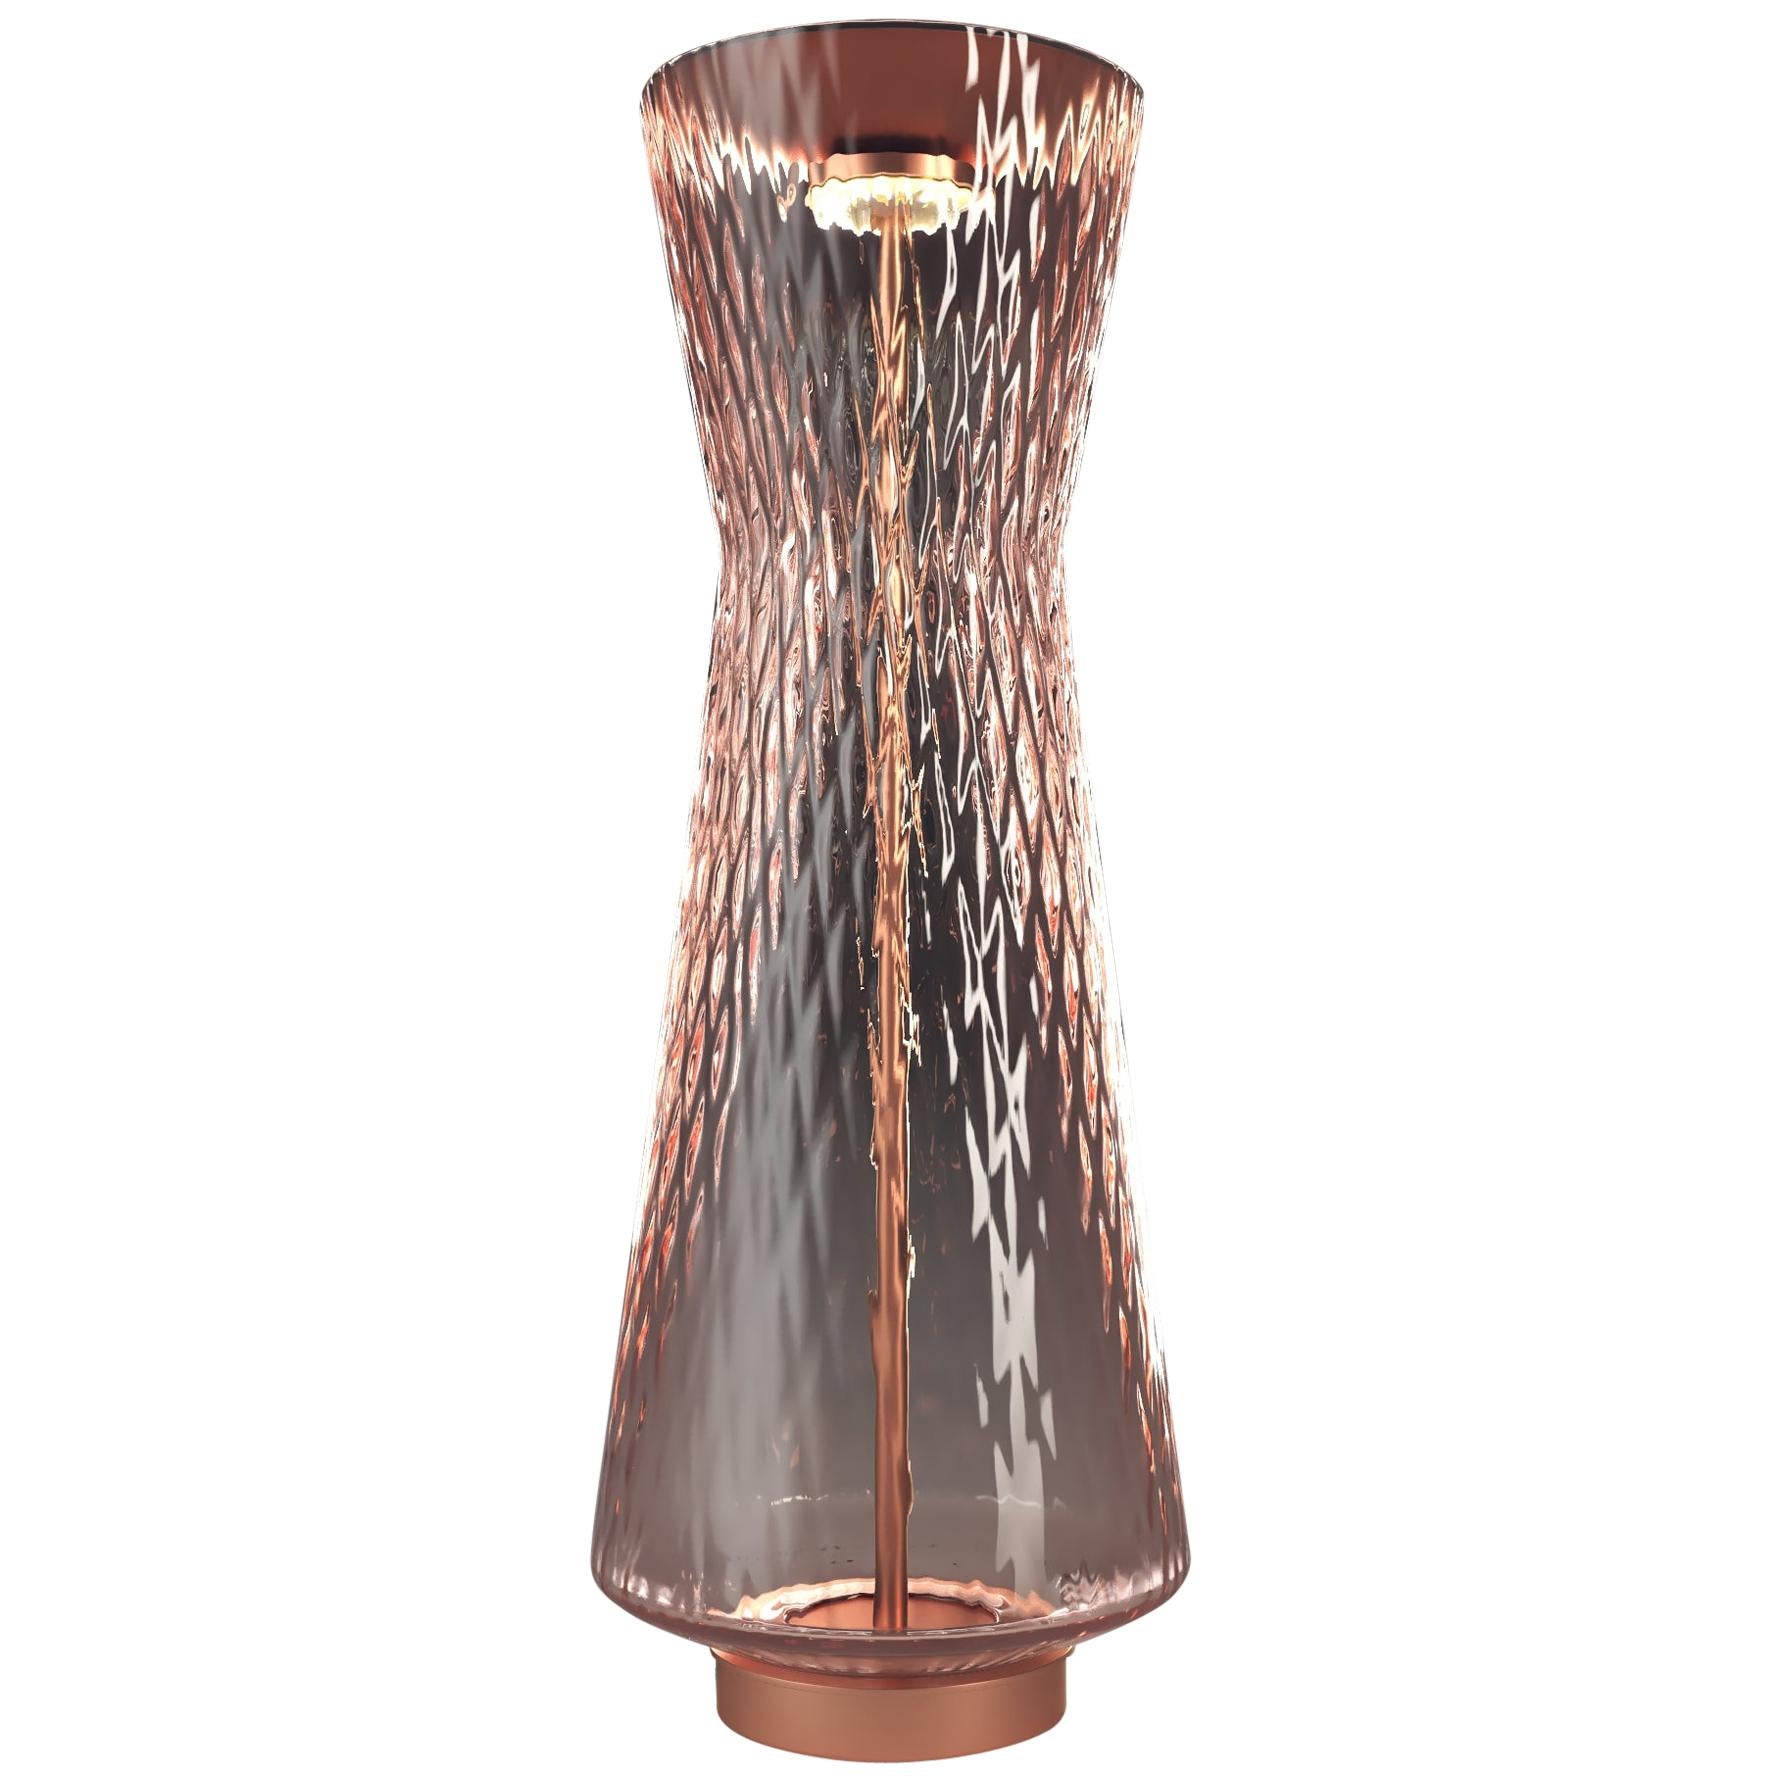 Venini Tiaraluce Large Table Light in Light Pink by Francesco Lucchese